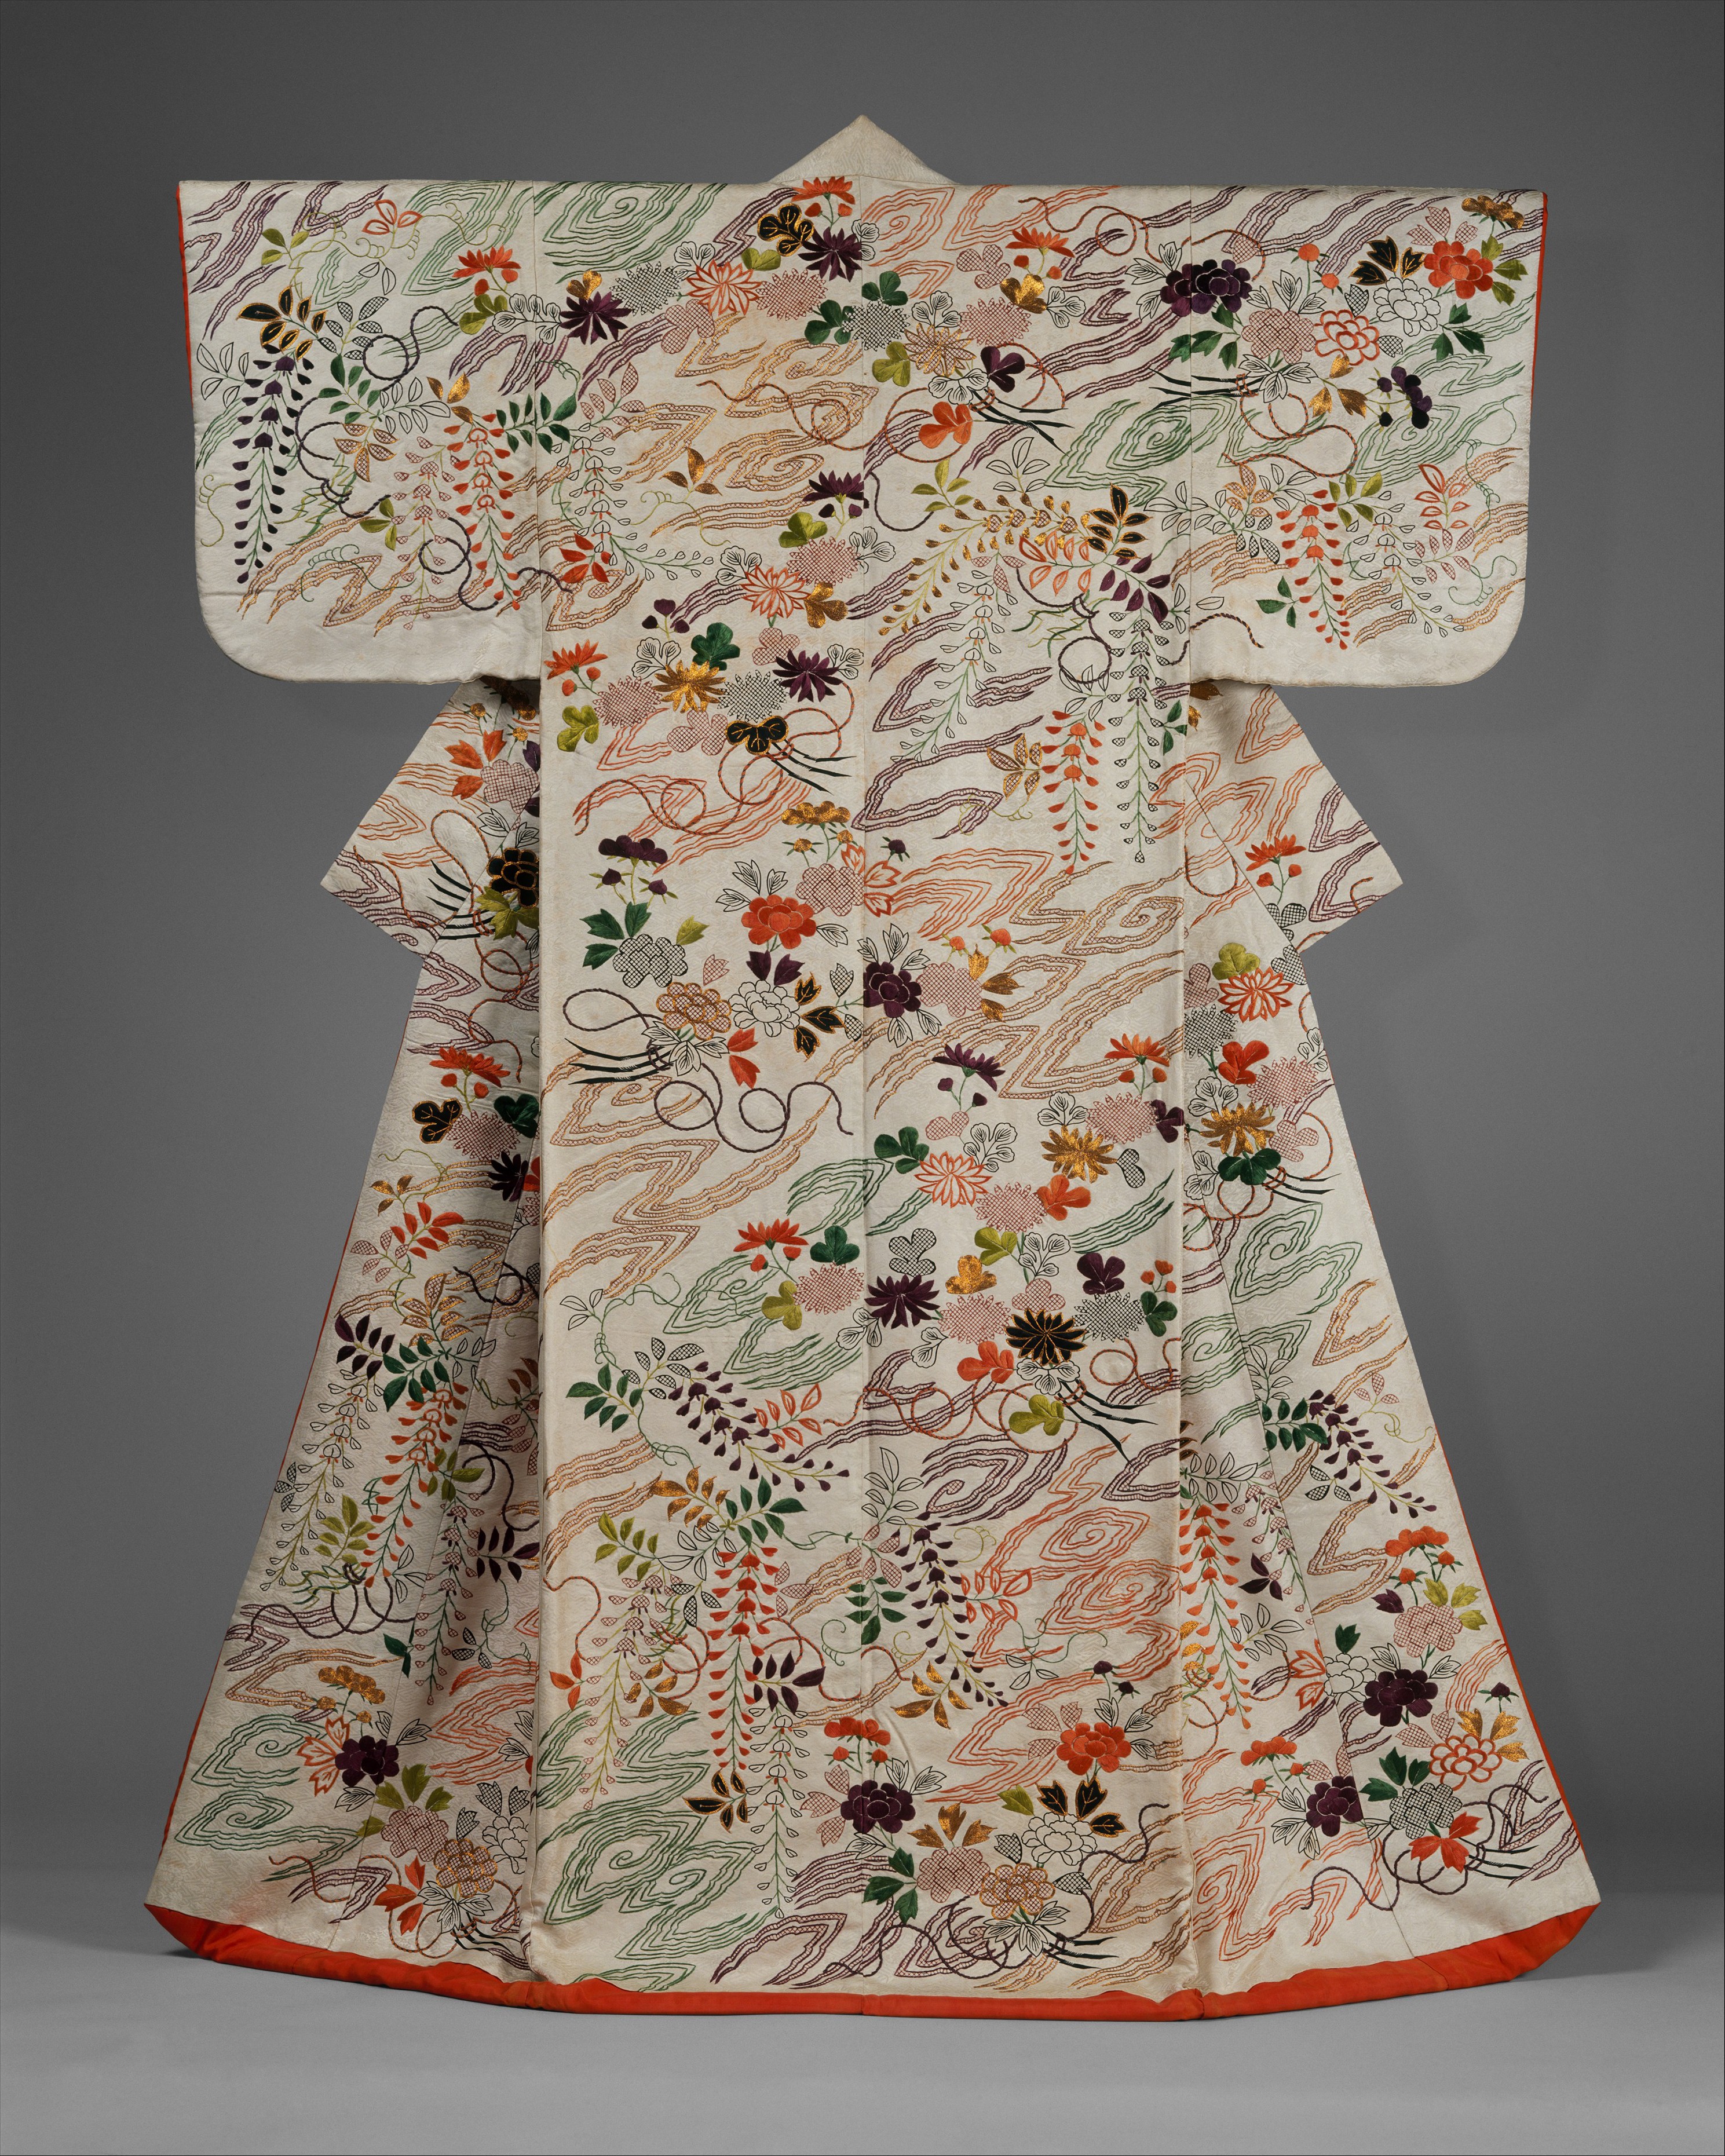 Outer Robe (Uchikake) with Chrysanthemum and Wisteria Bouquets | Japan ...